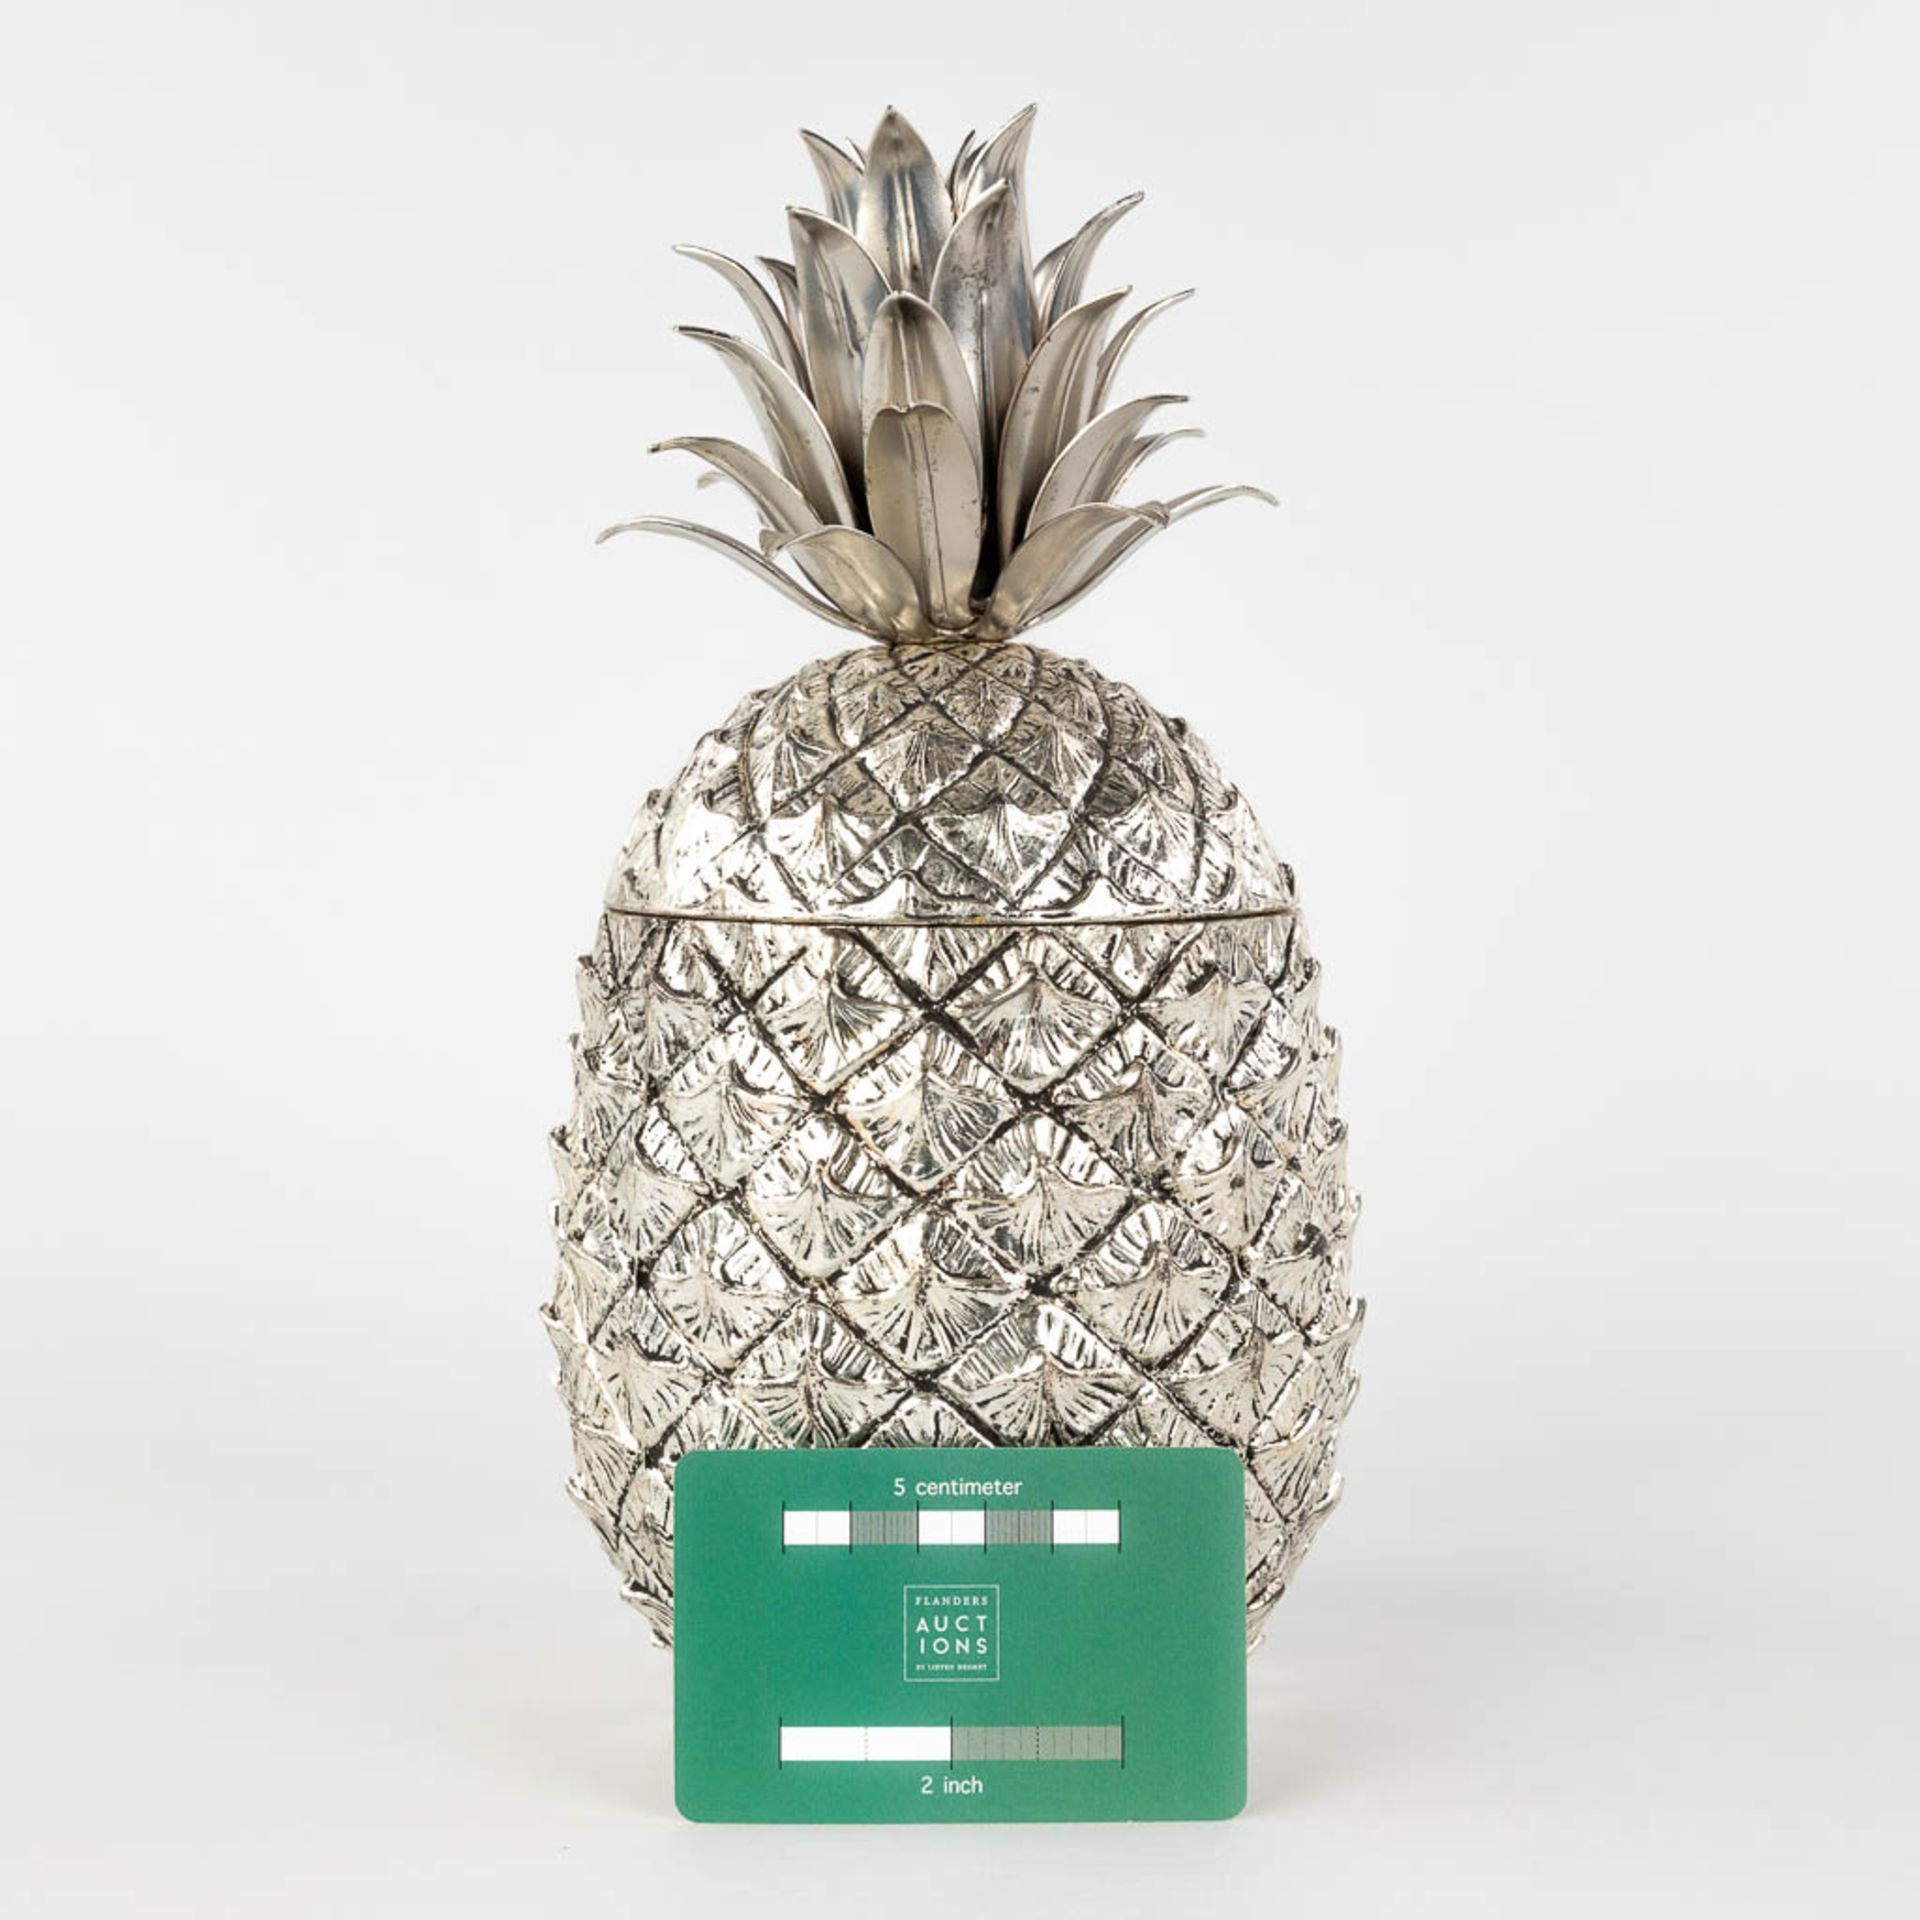 Mauro MANETTI (1946) 'Pineapple' an ice pail. (H:27 x D:13 cm) - Image 2 of 10